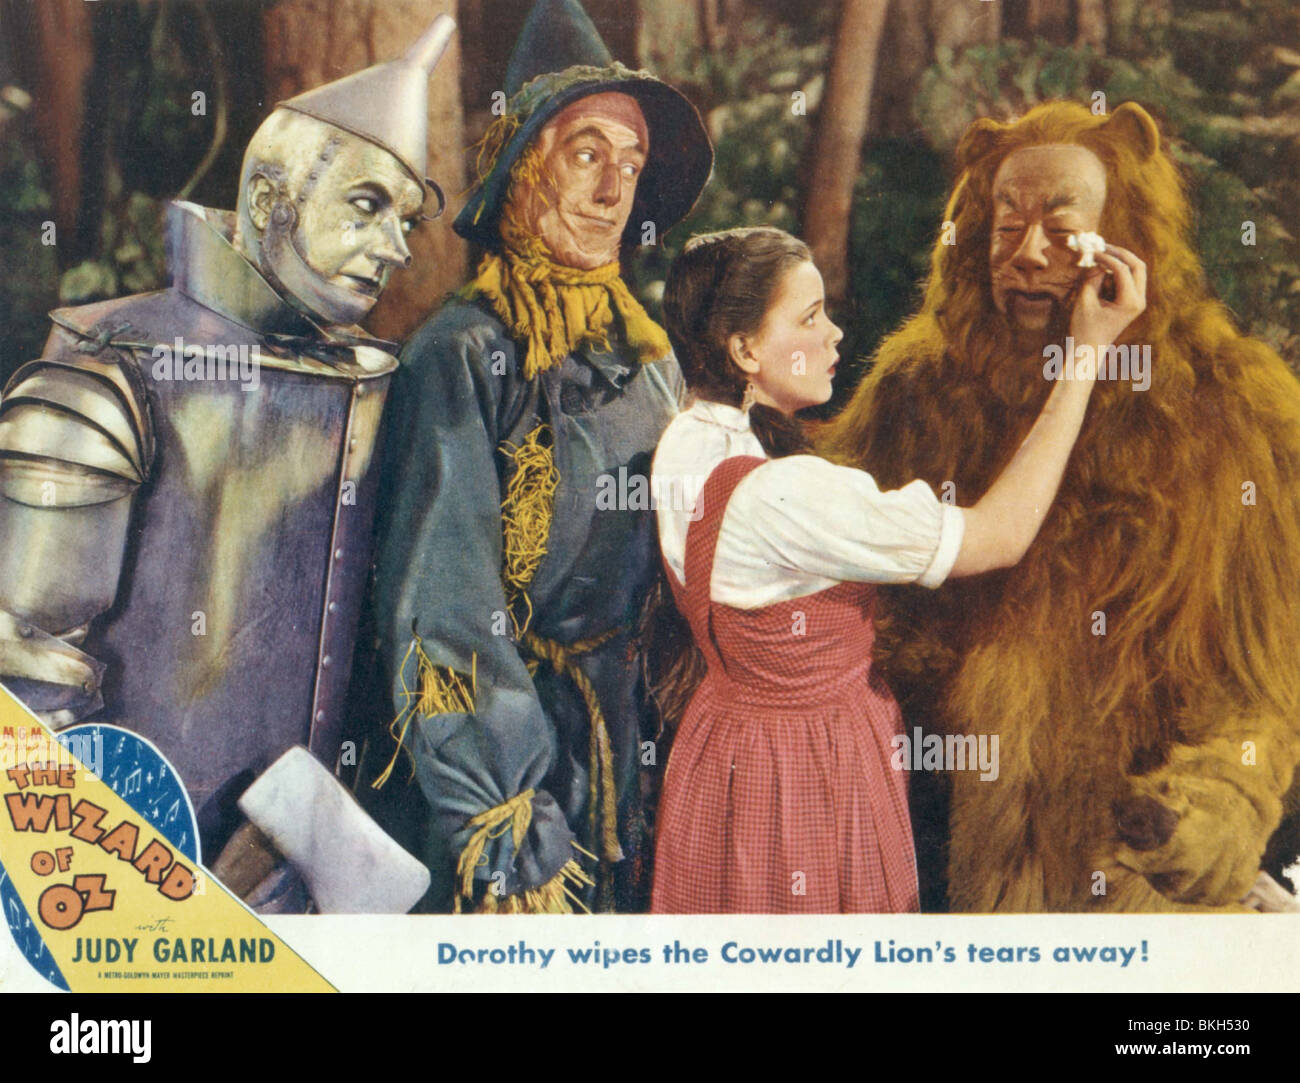 New Photo: The Wizard of Oz Cast Judy Garland Ray Bolger Bert Lahr 6 Sizes! 